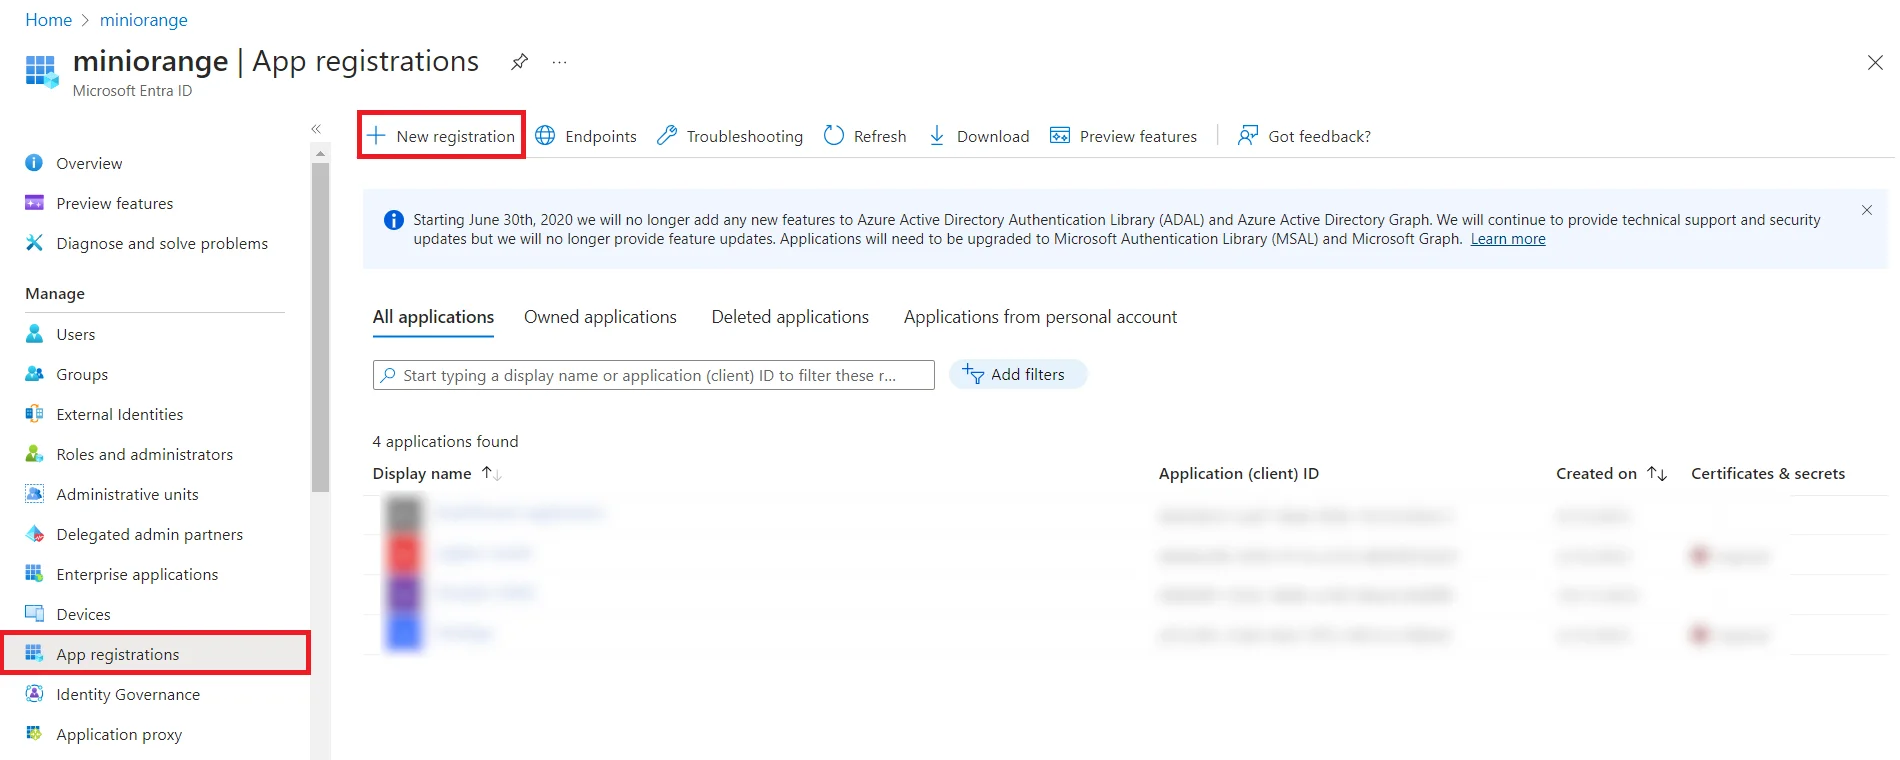 nopCommerce OAuth Single Sign-On (SSO) using Office365 as IDP - App-Registration